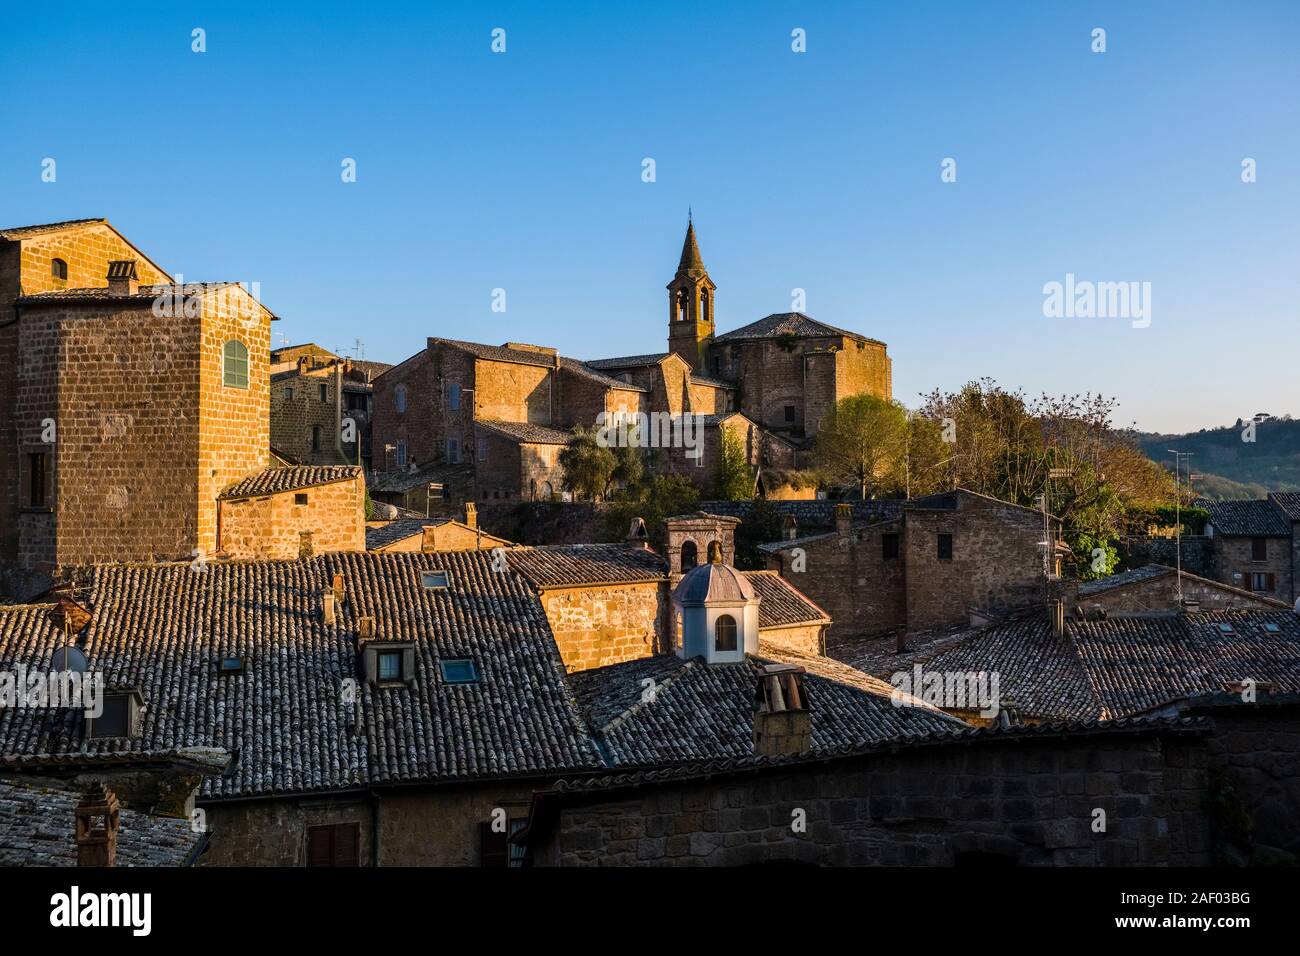 The church Chiesa di San Giovanni Evangelista, seen across the roofs of the medieval town Stock Photo